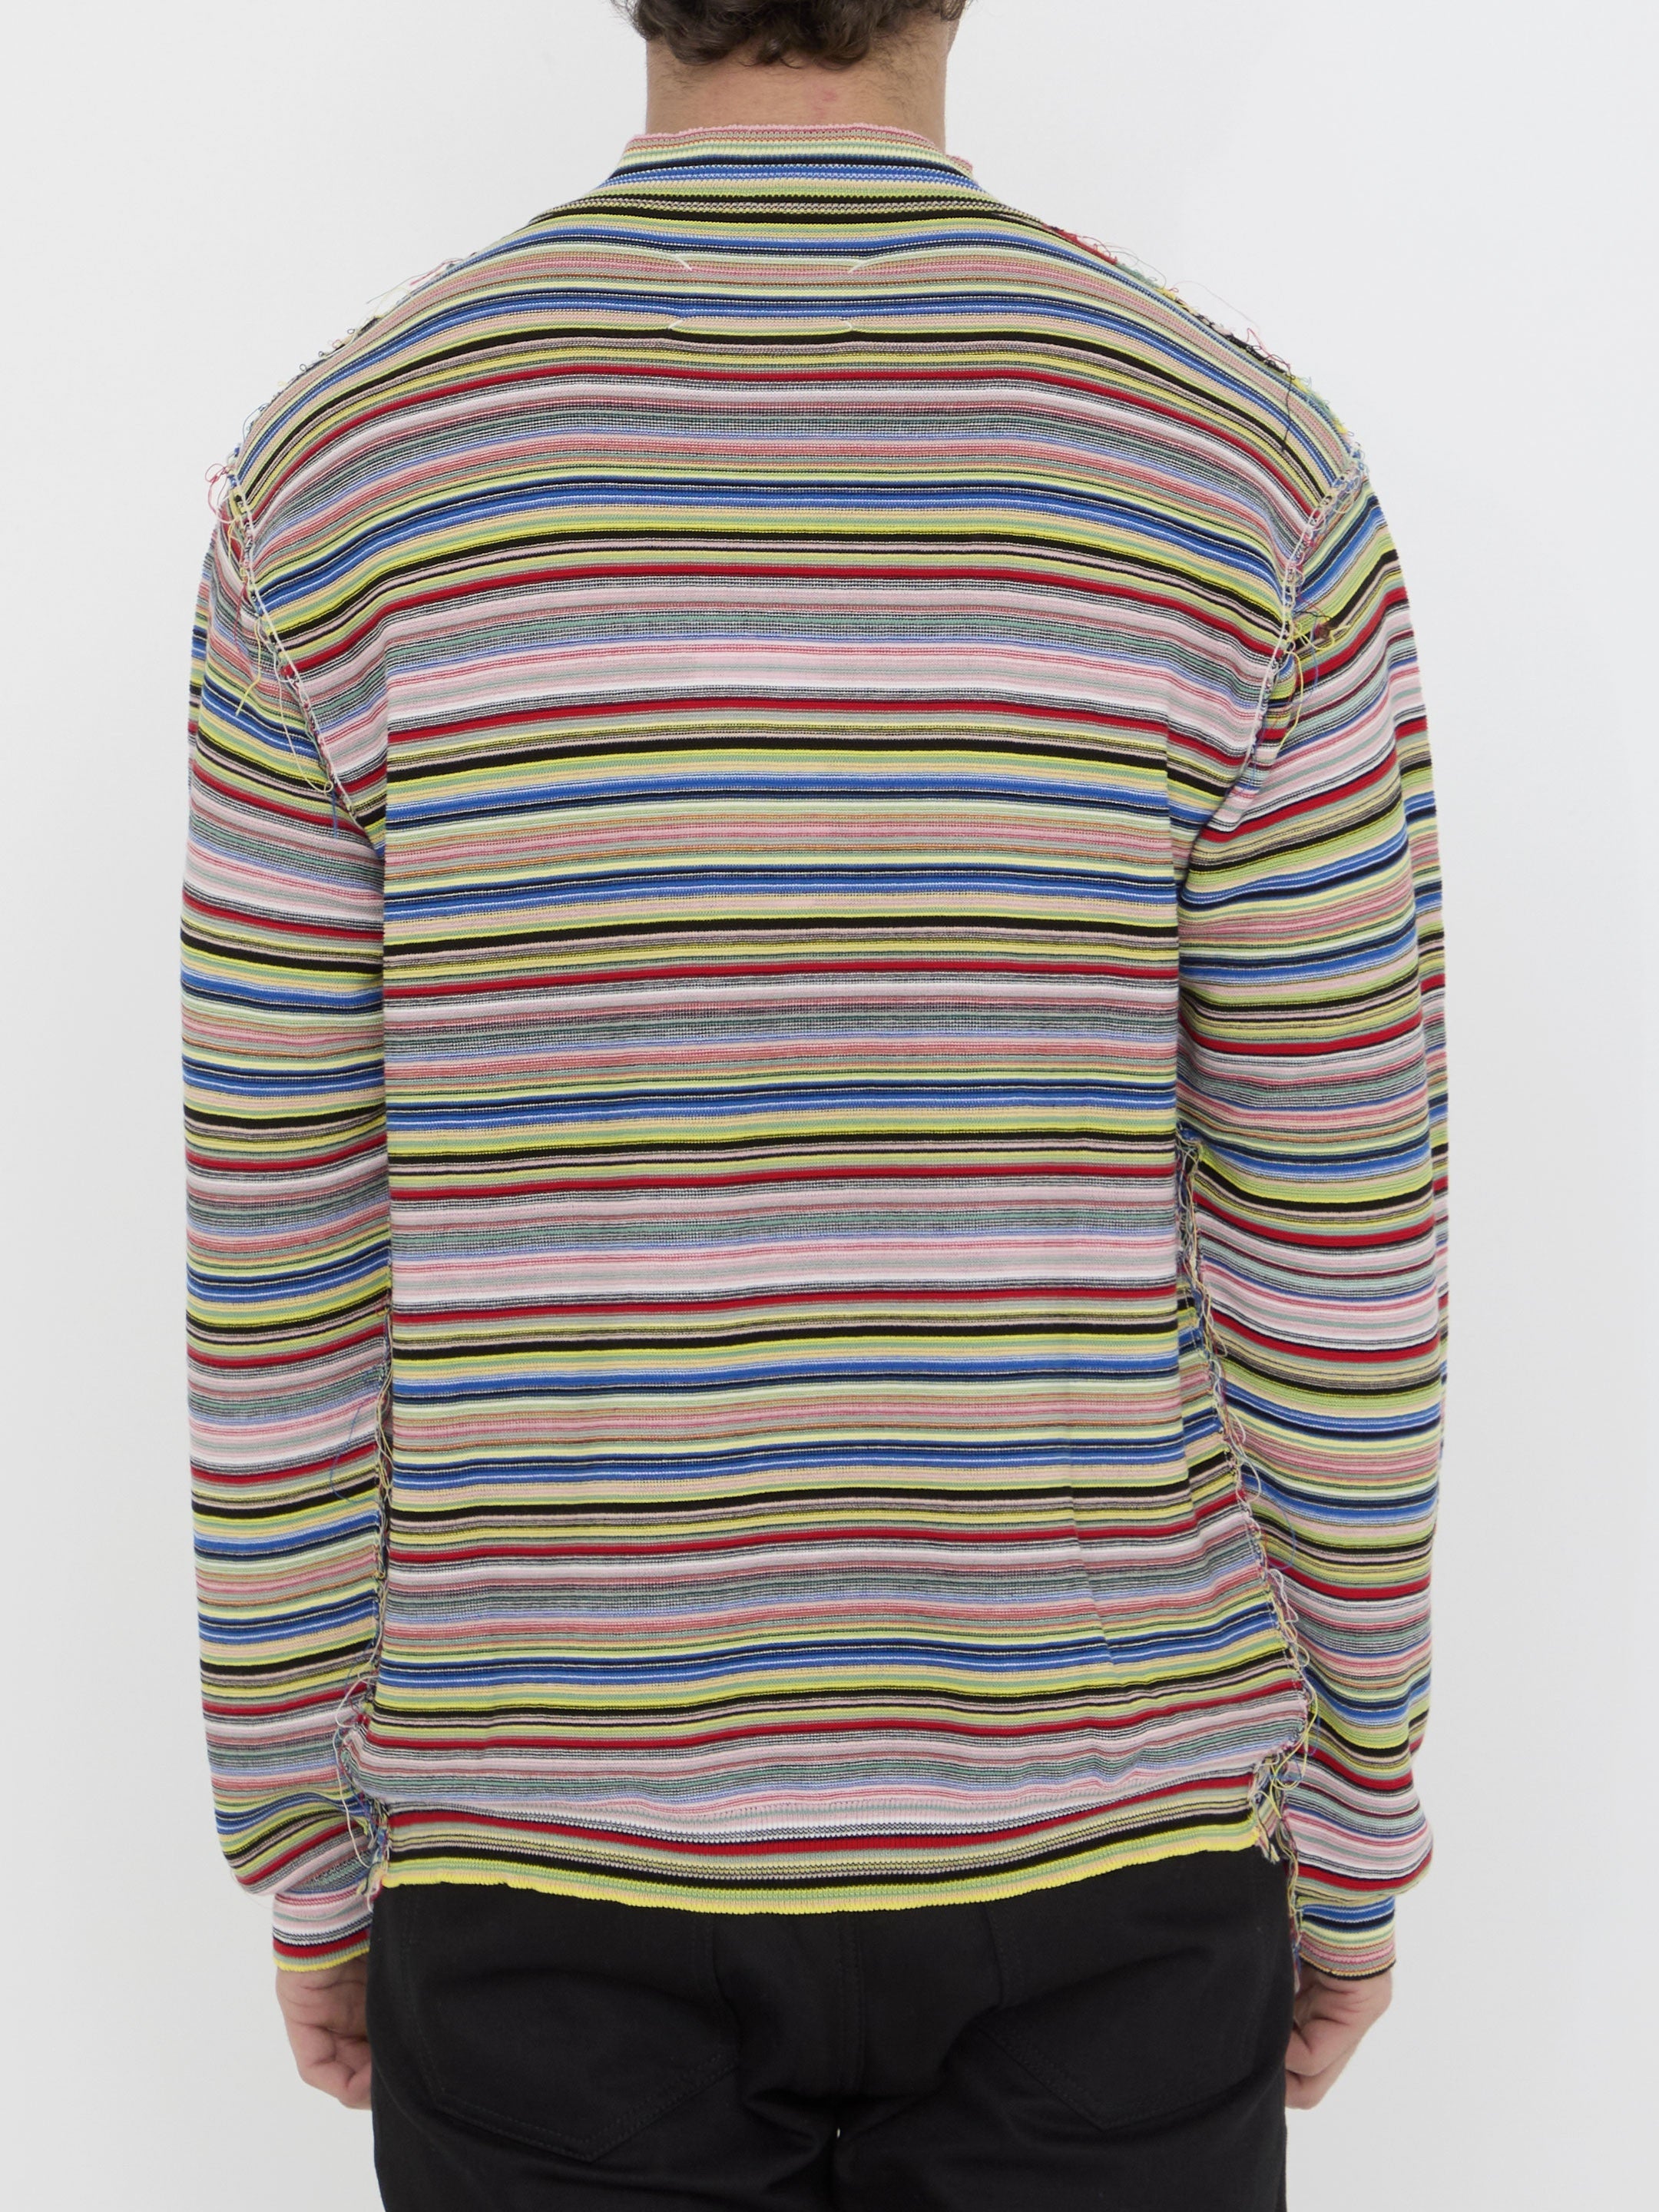 MAISON-MARGIELA-OUTLET-SALE-Striped-top-Shirts-ARCHIVE-COLLECTION-4.jpg